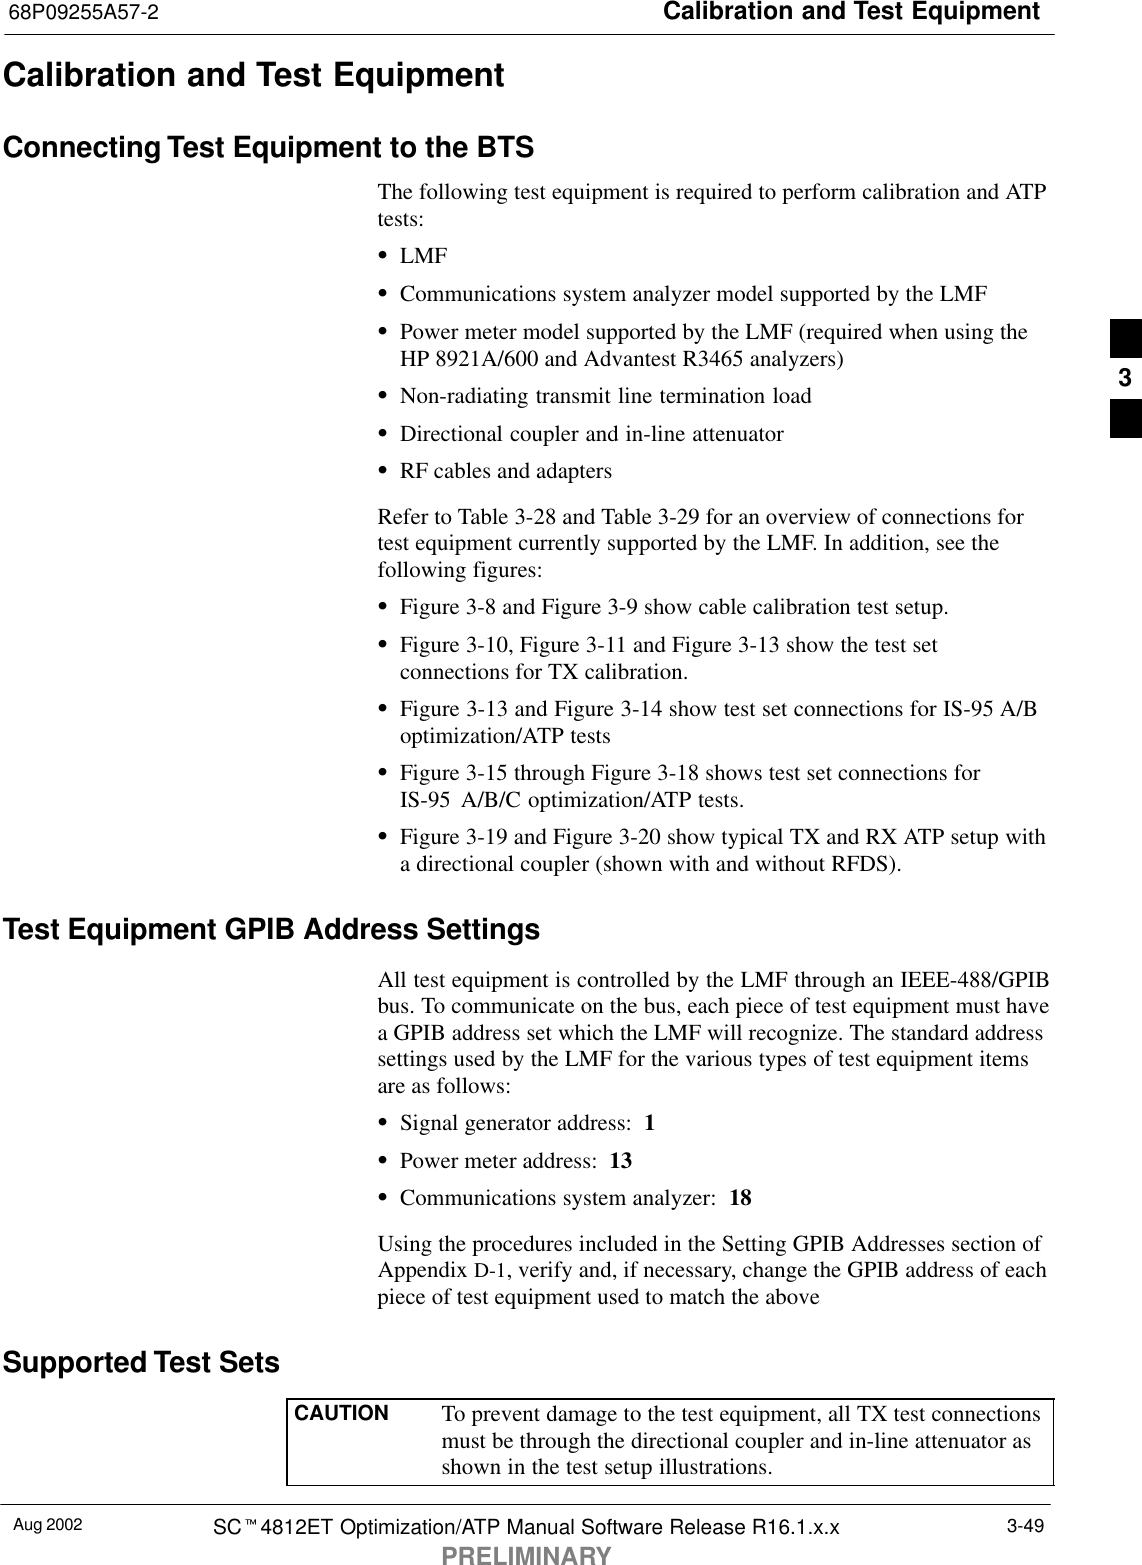 Calibration and Test Equipment68P09255A57-2Aug 2002 SCt4812ET Optimization/ATP Manual Software Release R16.1.x.xPRELIMINARY3-49Calibration and Test EquipmentConnecting Test Equipment to the BTSThe following test equipment is required to perform calibration and ATPtests:SLMFSCommunications system analyzer model supported by the LMFSPower meter model supported by the LMF (required when using theHP 8921A/600 and Advantest R3465 analyzers)SNon-radiating transmit line termination loadSDirectional coupler and in-line attenuatorSRF cables and adaptersRefer to Table 3-28 and Table 3-29 for an overview of connections fortest equipment currently supported by the LMF. In addition, see thefollowing figures:SFigure 3-8 and Figure 3-9 show cable calibration test setup.SFigure 3-10, Figure 3-11 and Figure 3-13 show the test setconnections for TX calibration.SFigure 3-13 and Figure 3-14 show test set connections for IS-95 A/Boptimization/ATP testsSFigure 3-15 through Figure 3-18 shows test set connections forIS-95 A/B/C optimization/ATP tests.SFigure 3-19 and Figure 3-20 show typical TX and RX ATP setup witha directional coupler (shown with and without RFDS).Test Equipment GPIB Address SettingsAll test equipment is controlled by the LMF through an IEEE-488/GPIBbus. To communicate on the bus, each piece of test equipment must havea GPIB address set which the LMF will recognize. The standard addresssettings used by the LMF for the various types of test equipment itemsare as follows:SSignal generator address:  1SPower meter address:  13SCommunications system analyzer:  18Using the procedures included in the Setting GPIB Addresses section ofAppendix D-1, verify and, if necessary, change the GPIB address of eachpiece of test equipment used to match the above.Supported Test SetsCAUTION To prevent damage to the test equipment, all TX test connectionsmust be through the directional coupler and in-line attenuator asshown in the test setup illustrations.3